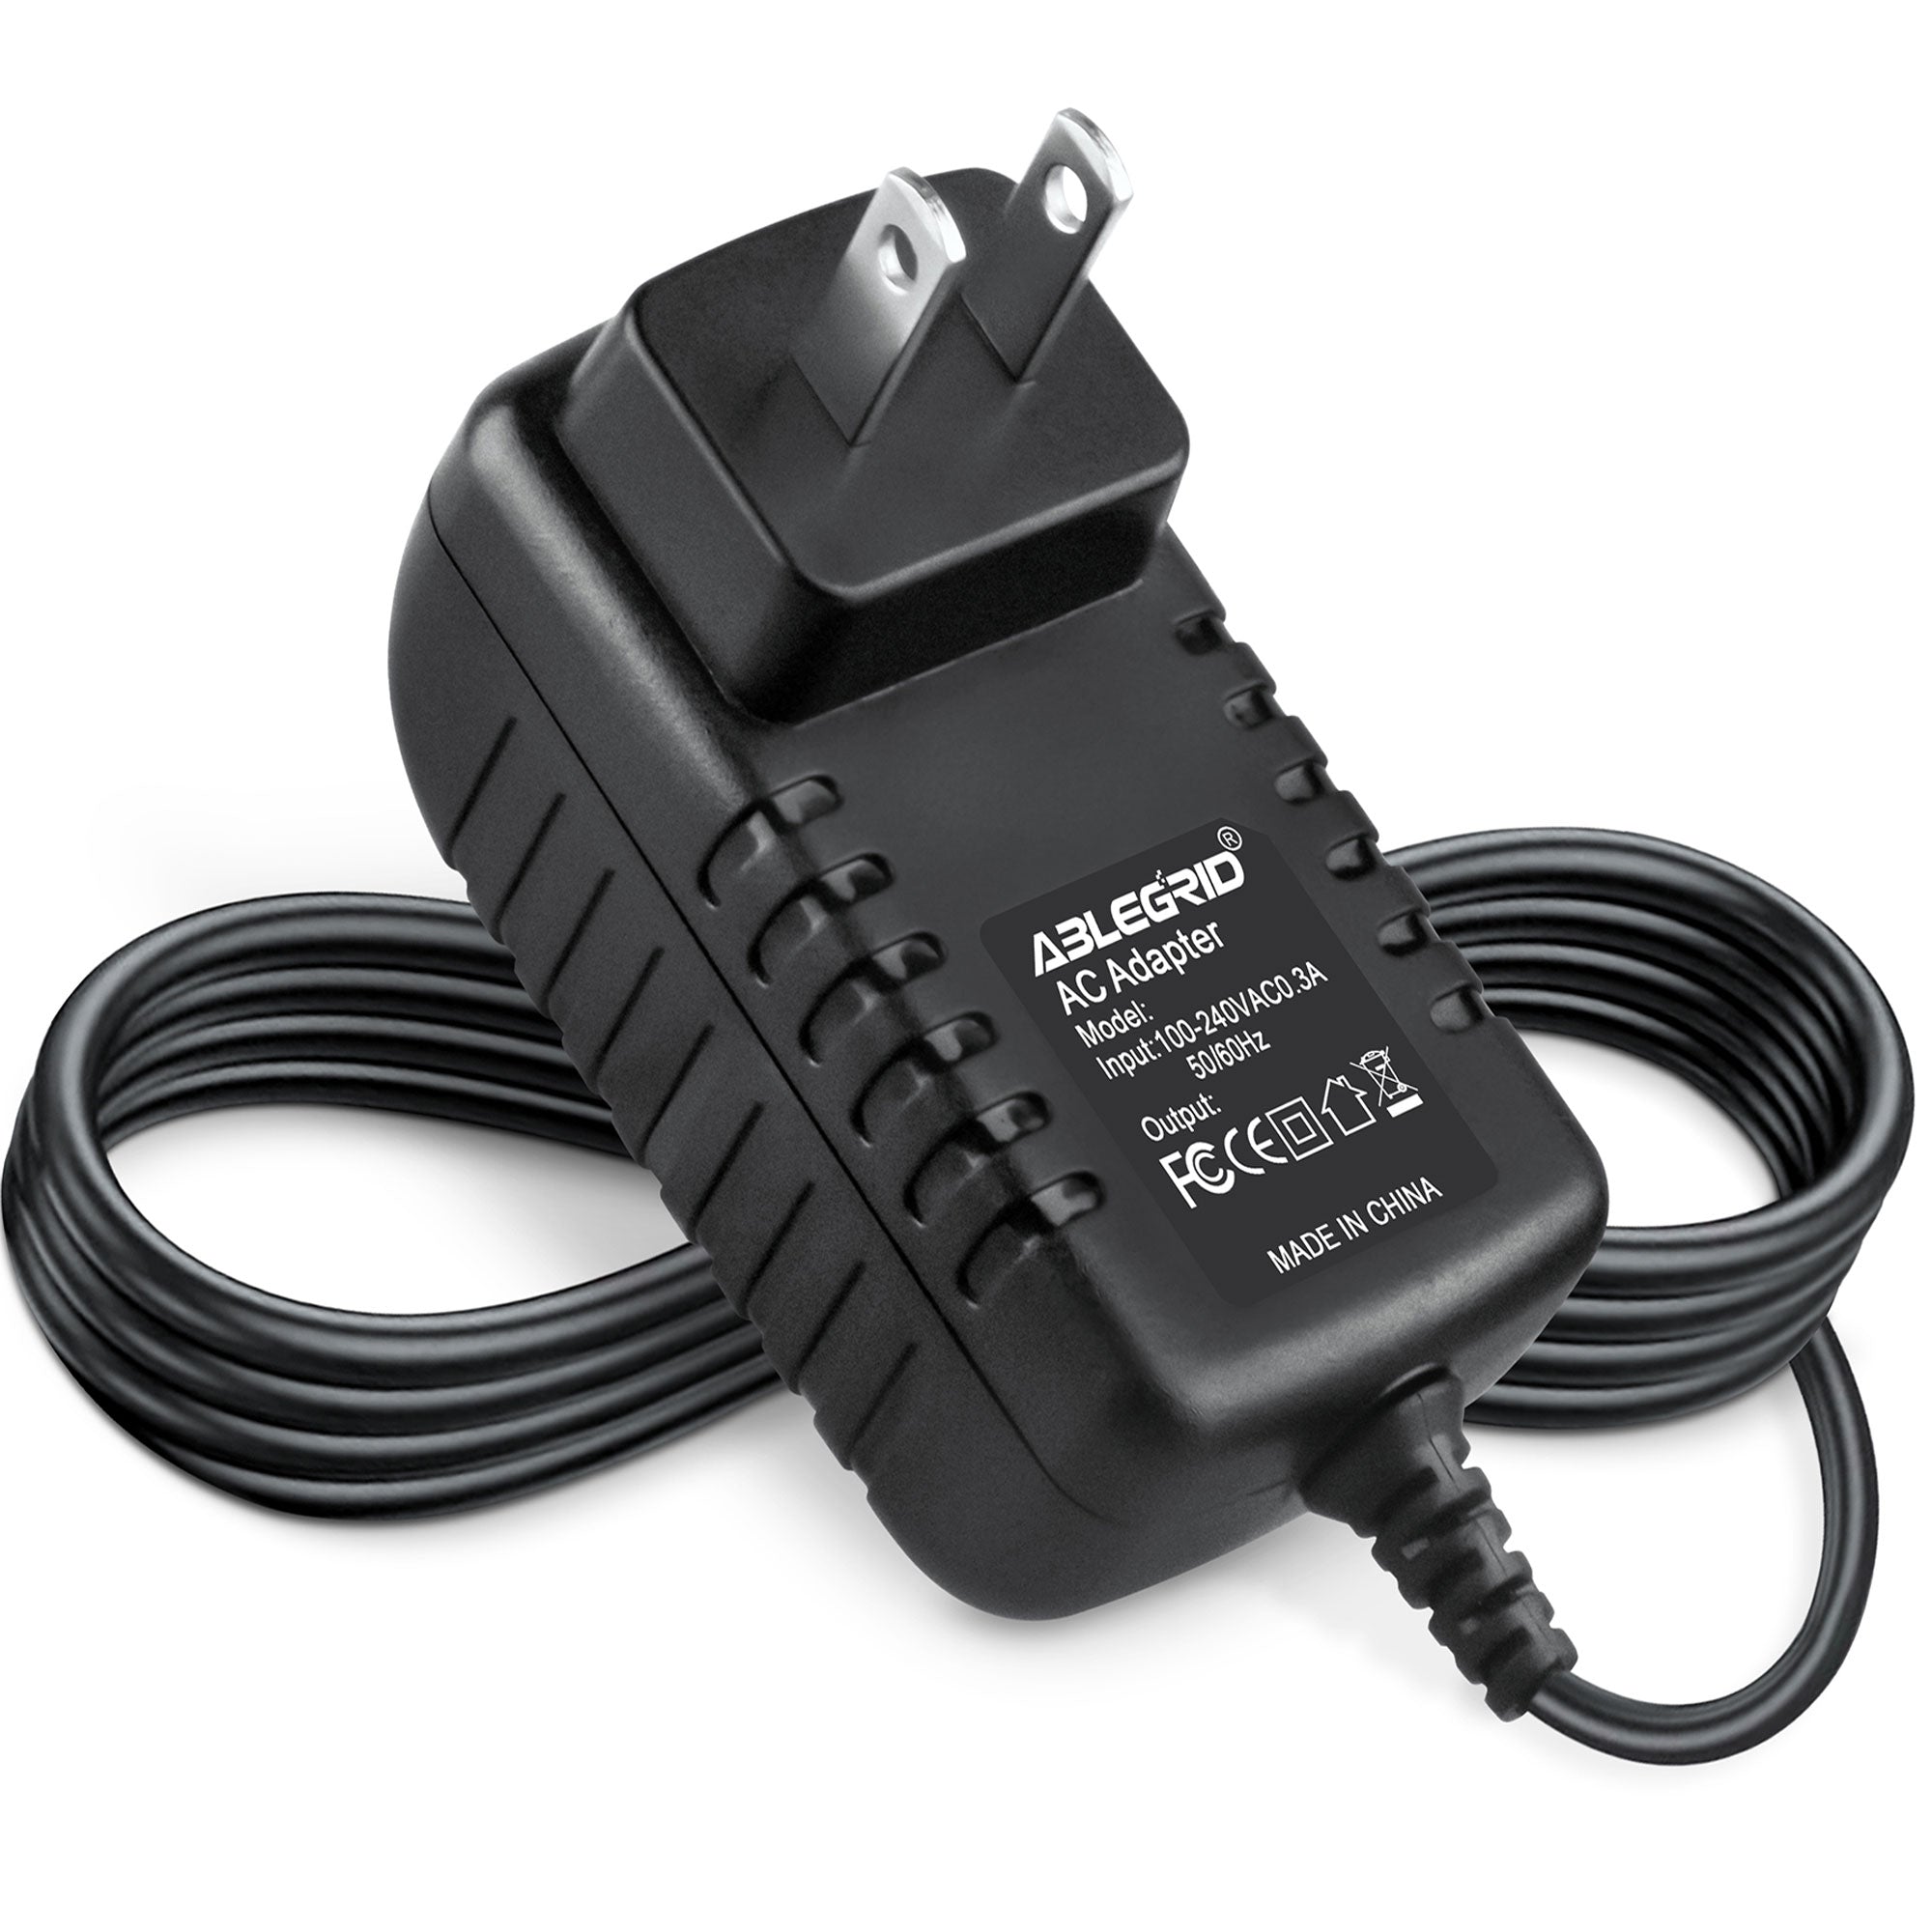 AbleGrid AC-DC Adapter for Black & Decker Cat. No. 9049 Series TS220 TS230 B&D BD Cordless Drill Driver Power Supply Cord Cable PS Wall Home Battery Charger Input: 100V - 120V AC - 240 VAC 50/60Hz Worldwide Voltage Use Mains PSU